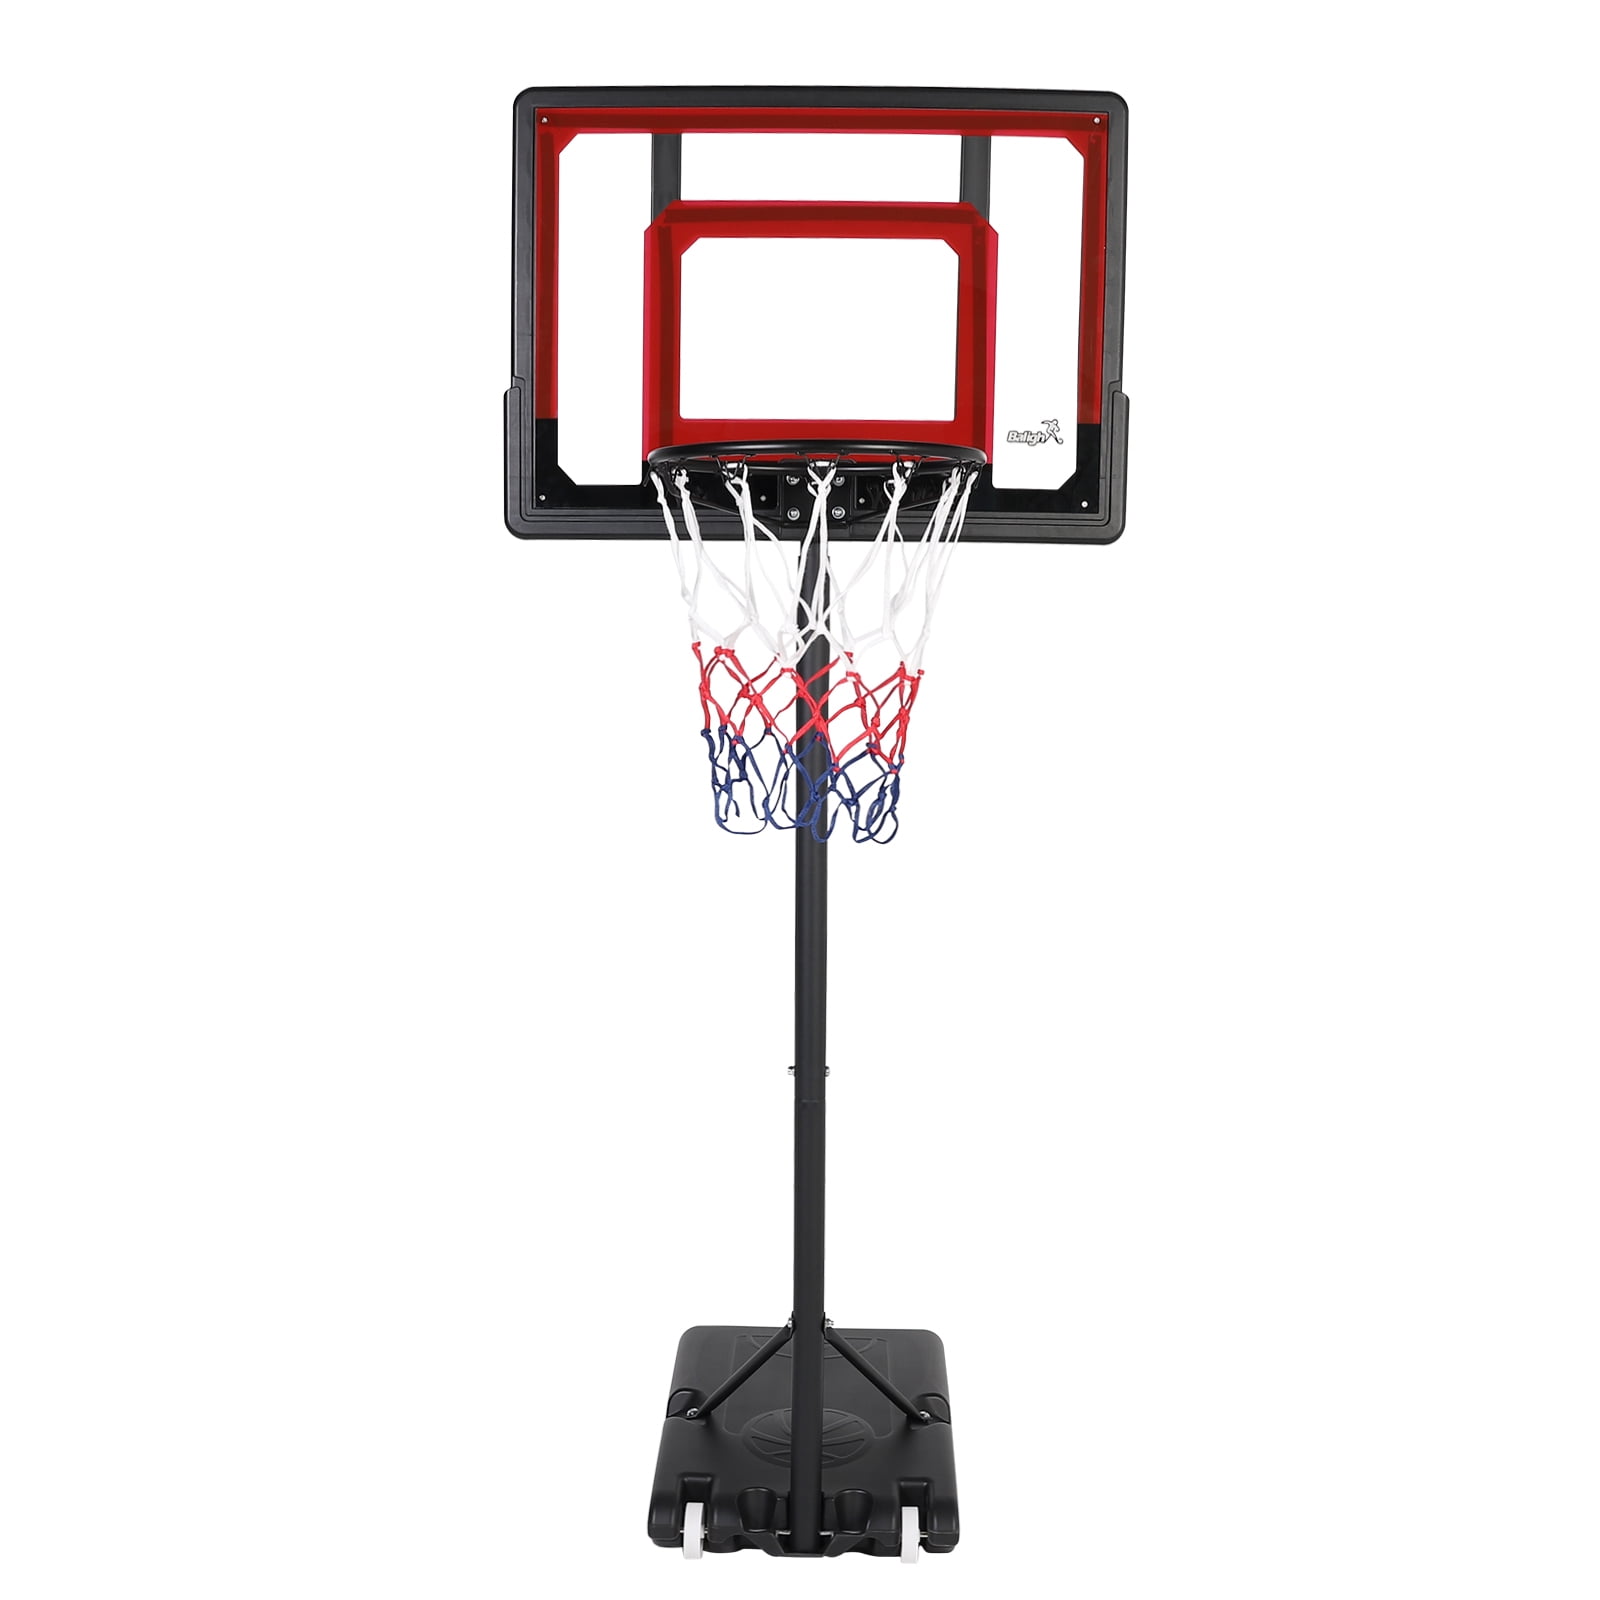 Waful Portable Basketball Hoop & Backboard System Stand and Rim 7.2ft for Youth Kids Adults Family Indoor Outdoor Use Goal Basketball Equipment w/Wheels Adjustable Height 5.2ft 